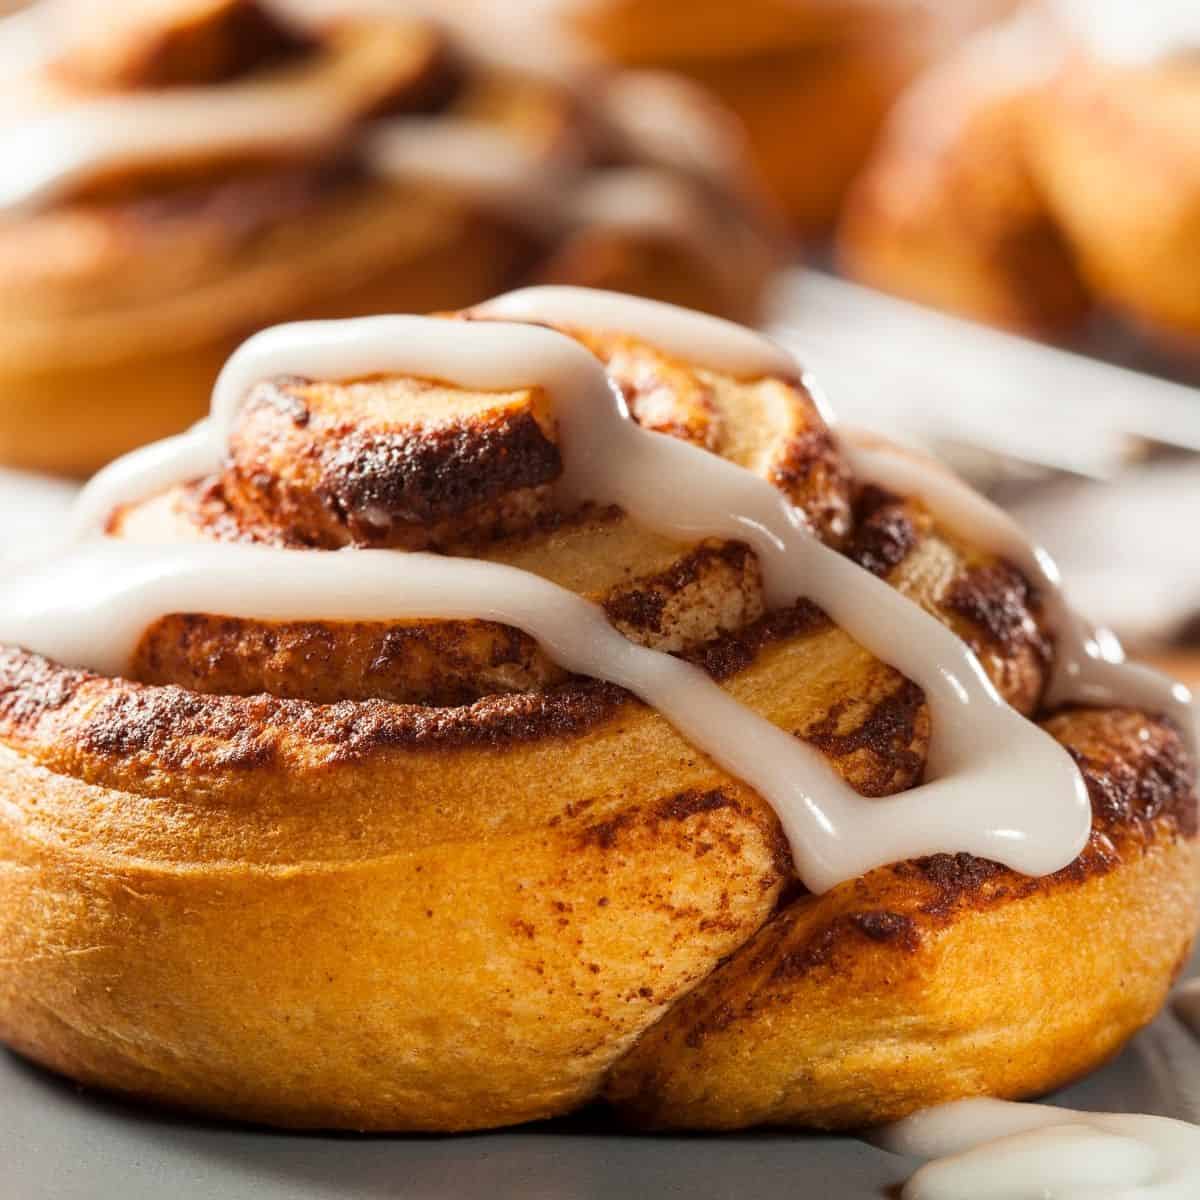 Homemade cinnamon bums with icing drizzled on top